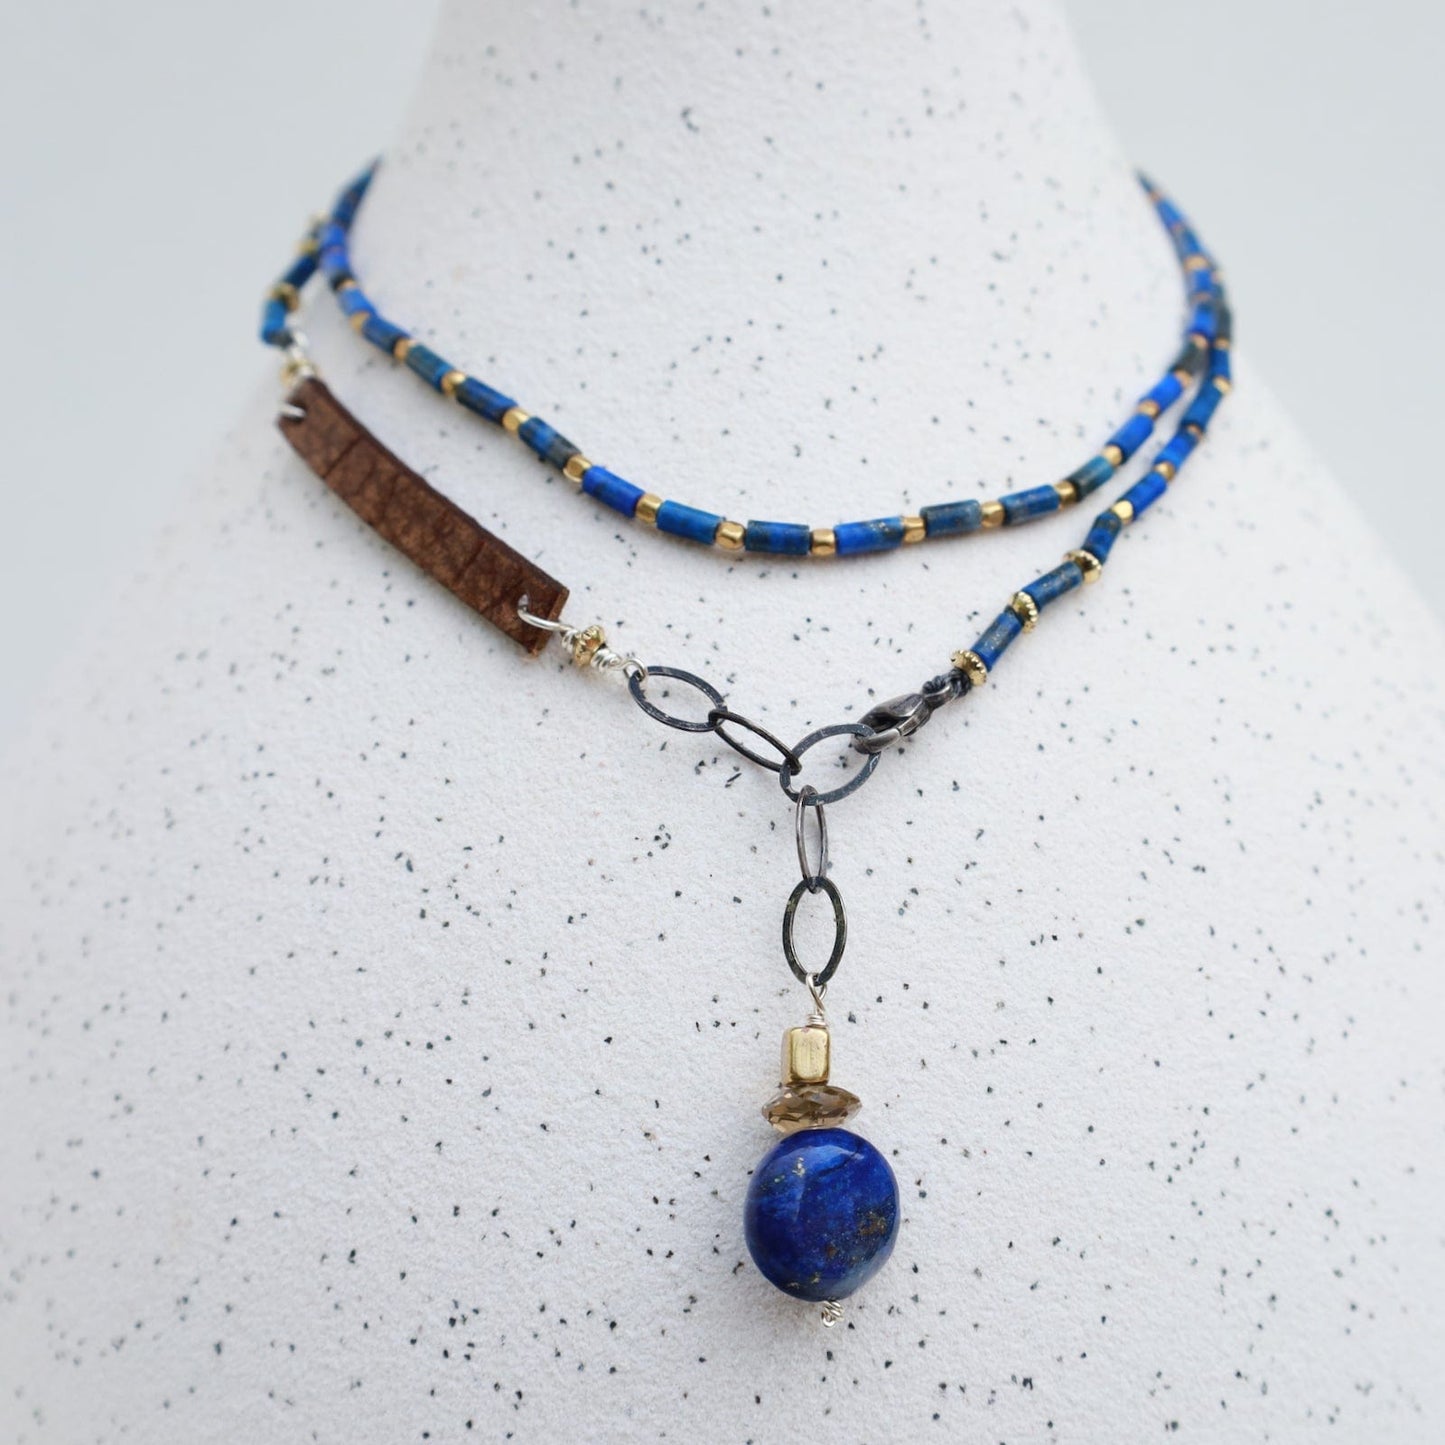 NKL Delicate Lapis & Leather Necklace